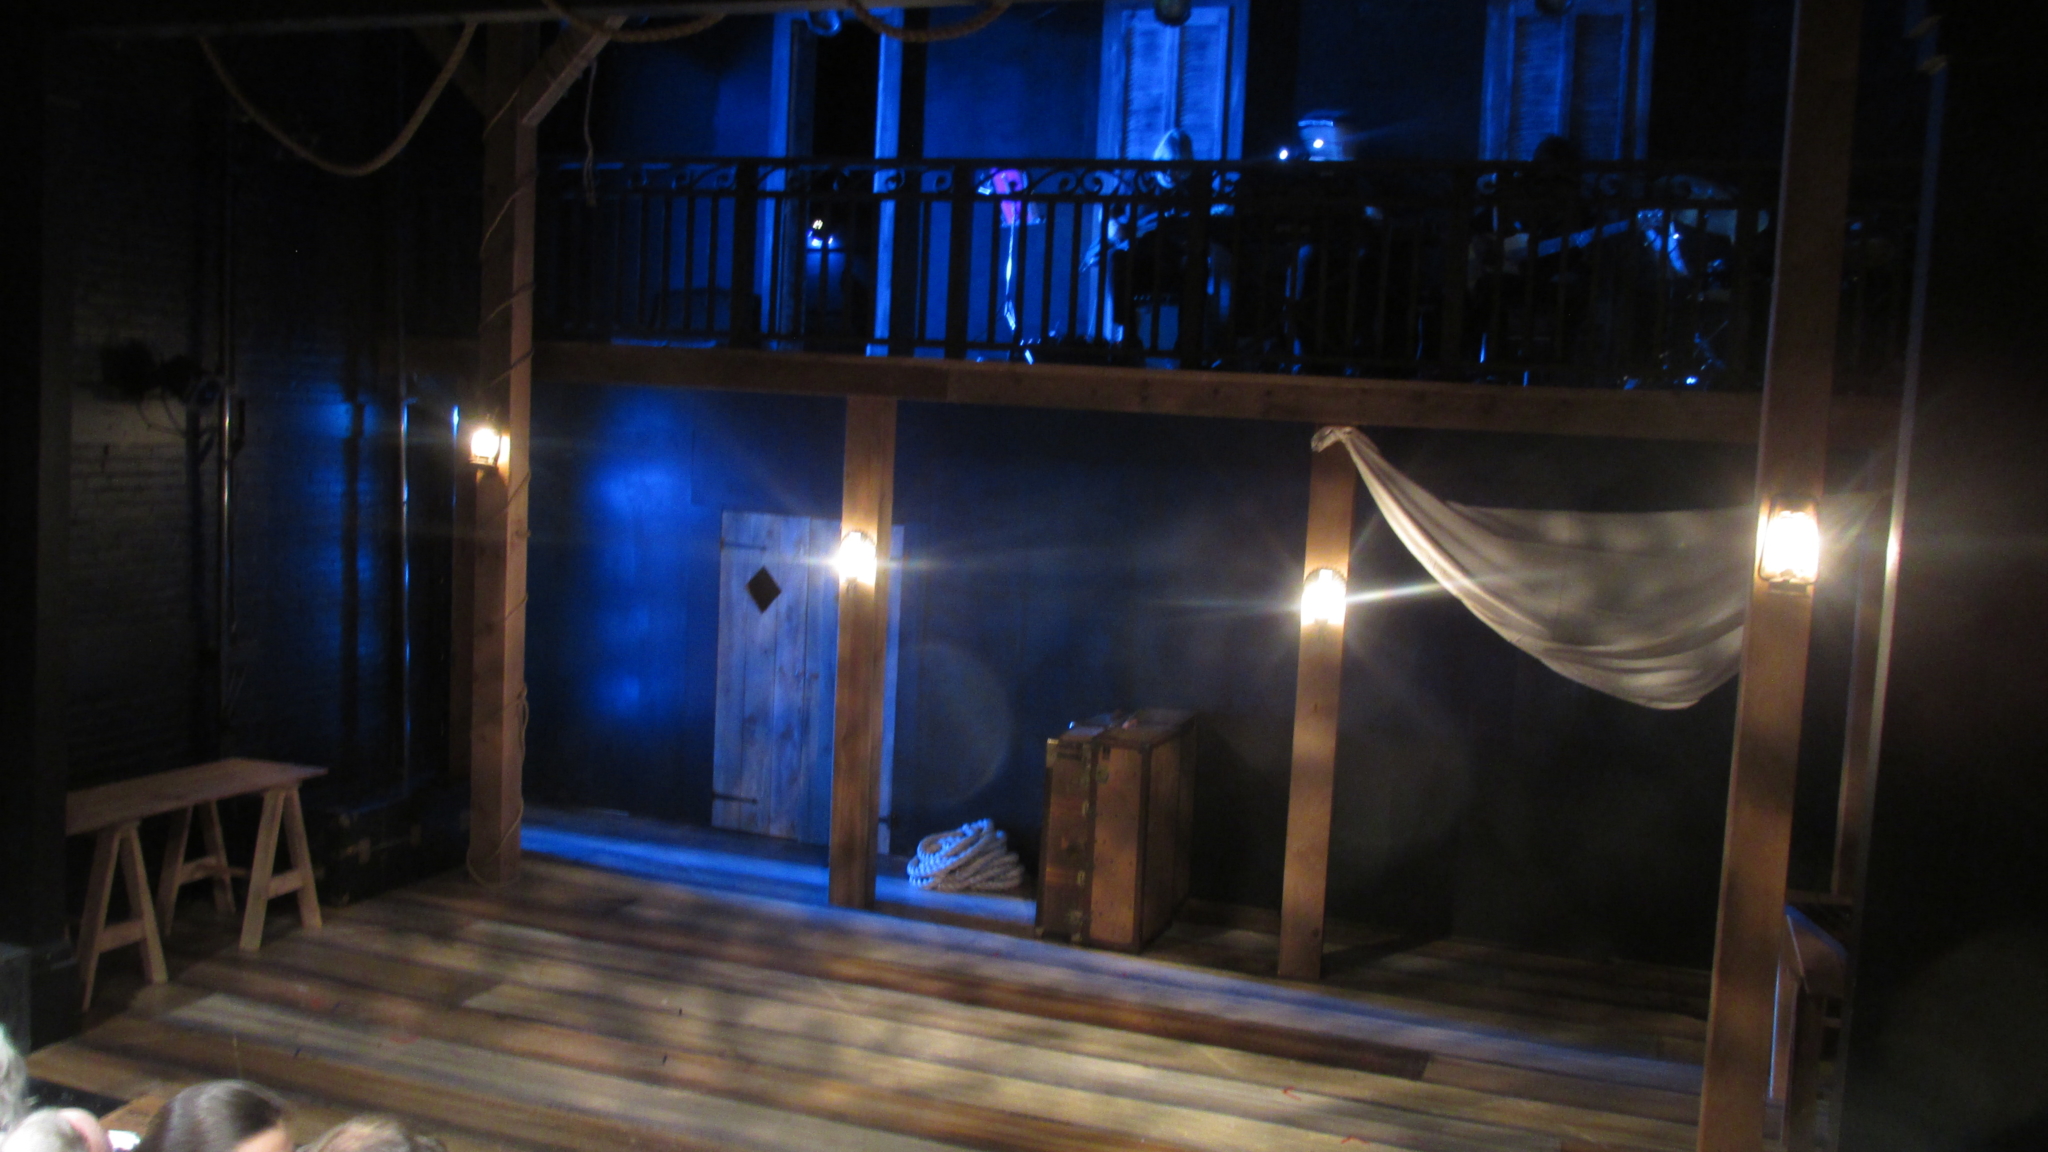 The set of FPTC’s “Dreambook” – clever, striking, and functional.